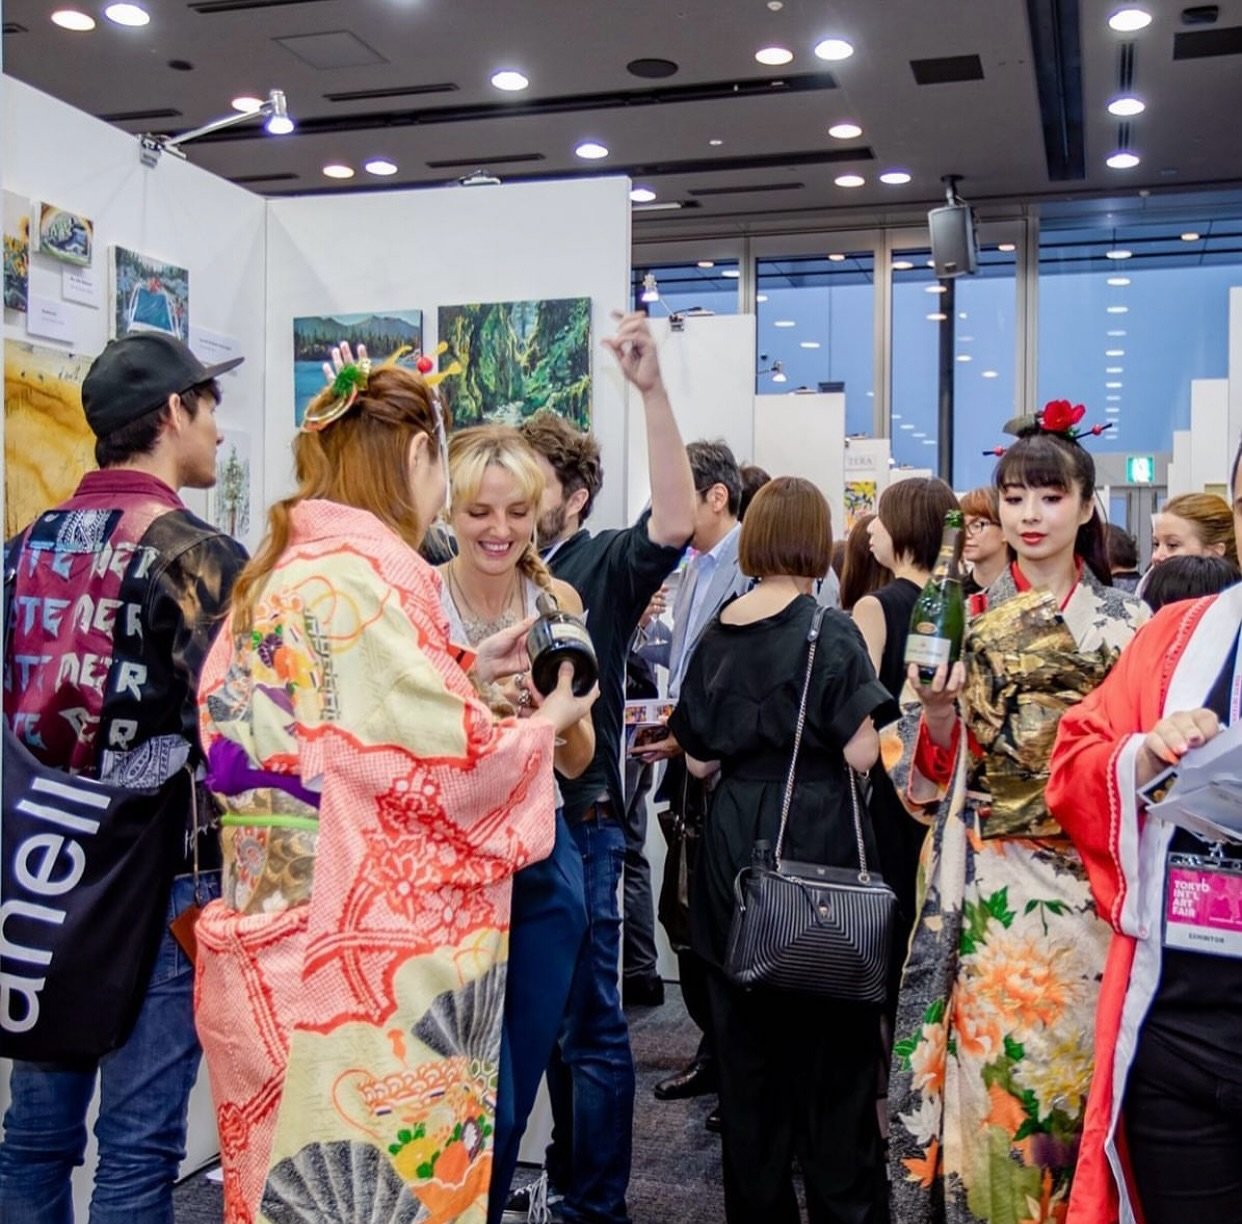 📣 Application deadline to exhibit 15th June 2024. 
Almost fully booked. #curated 

100 exhibitors from all over the world will be exhibiting and selling original artworks at the 7th edition of the @tokyointernationalartfair 29-30 Nov 2024. www.tokyo